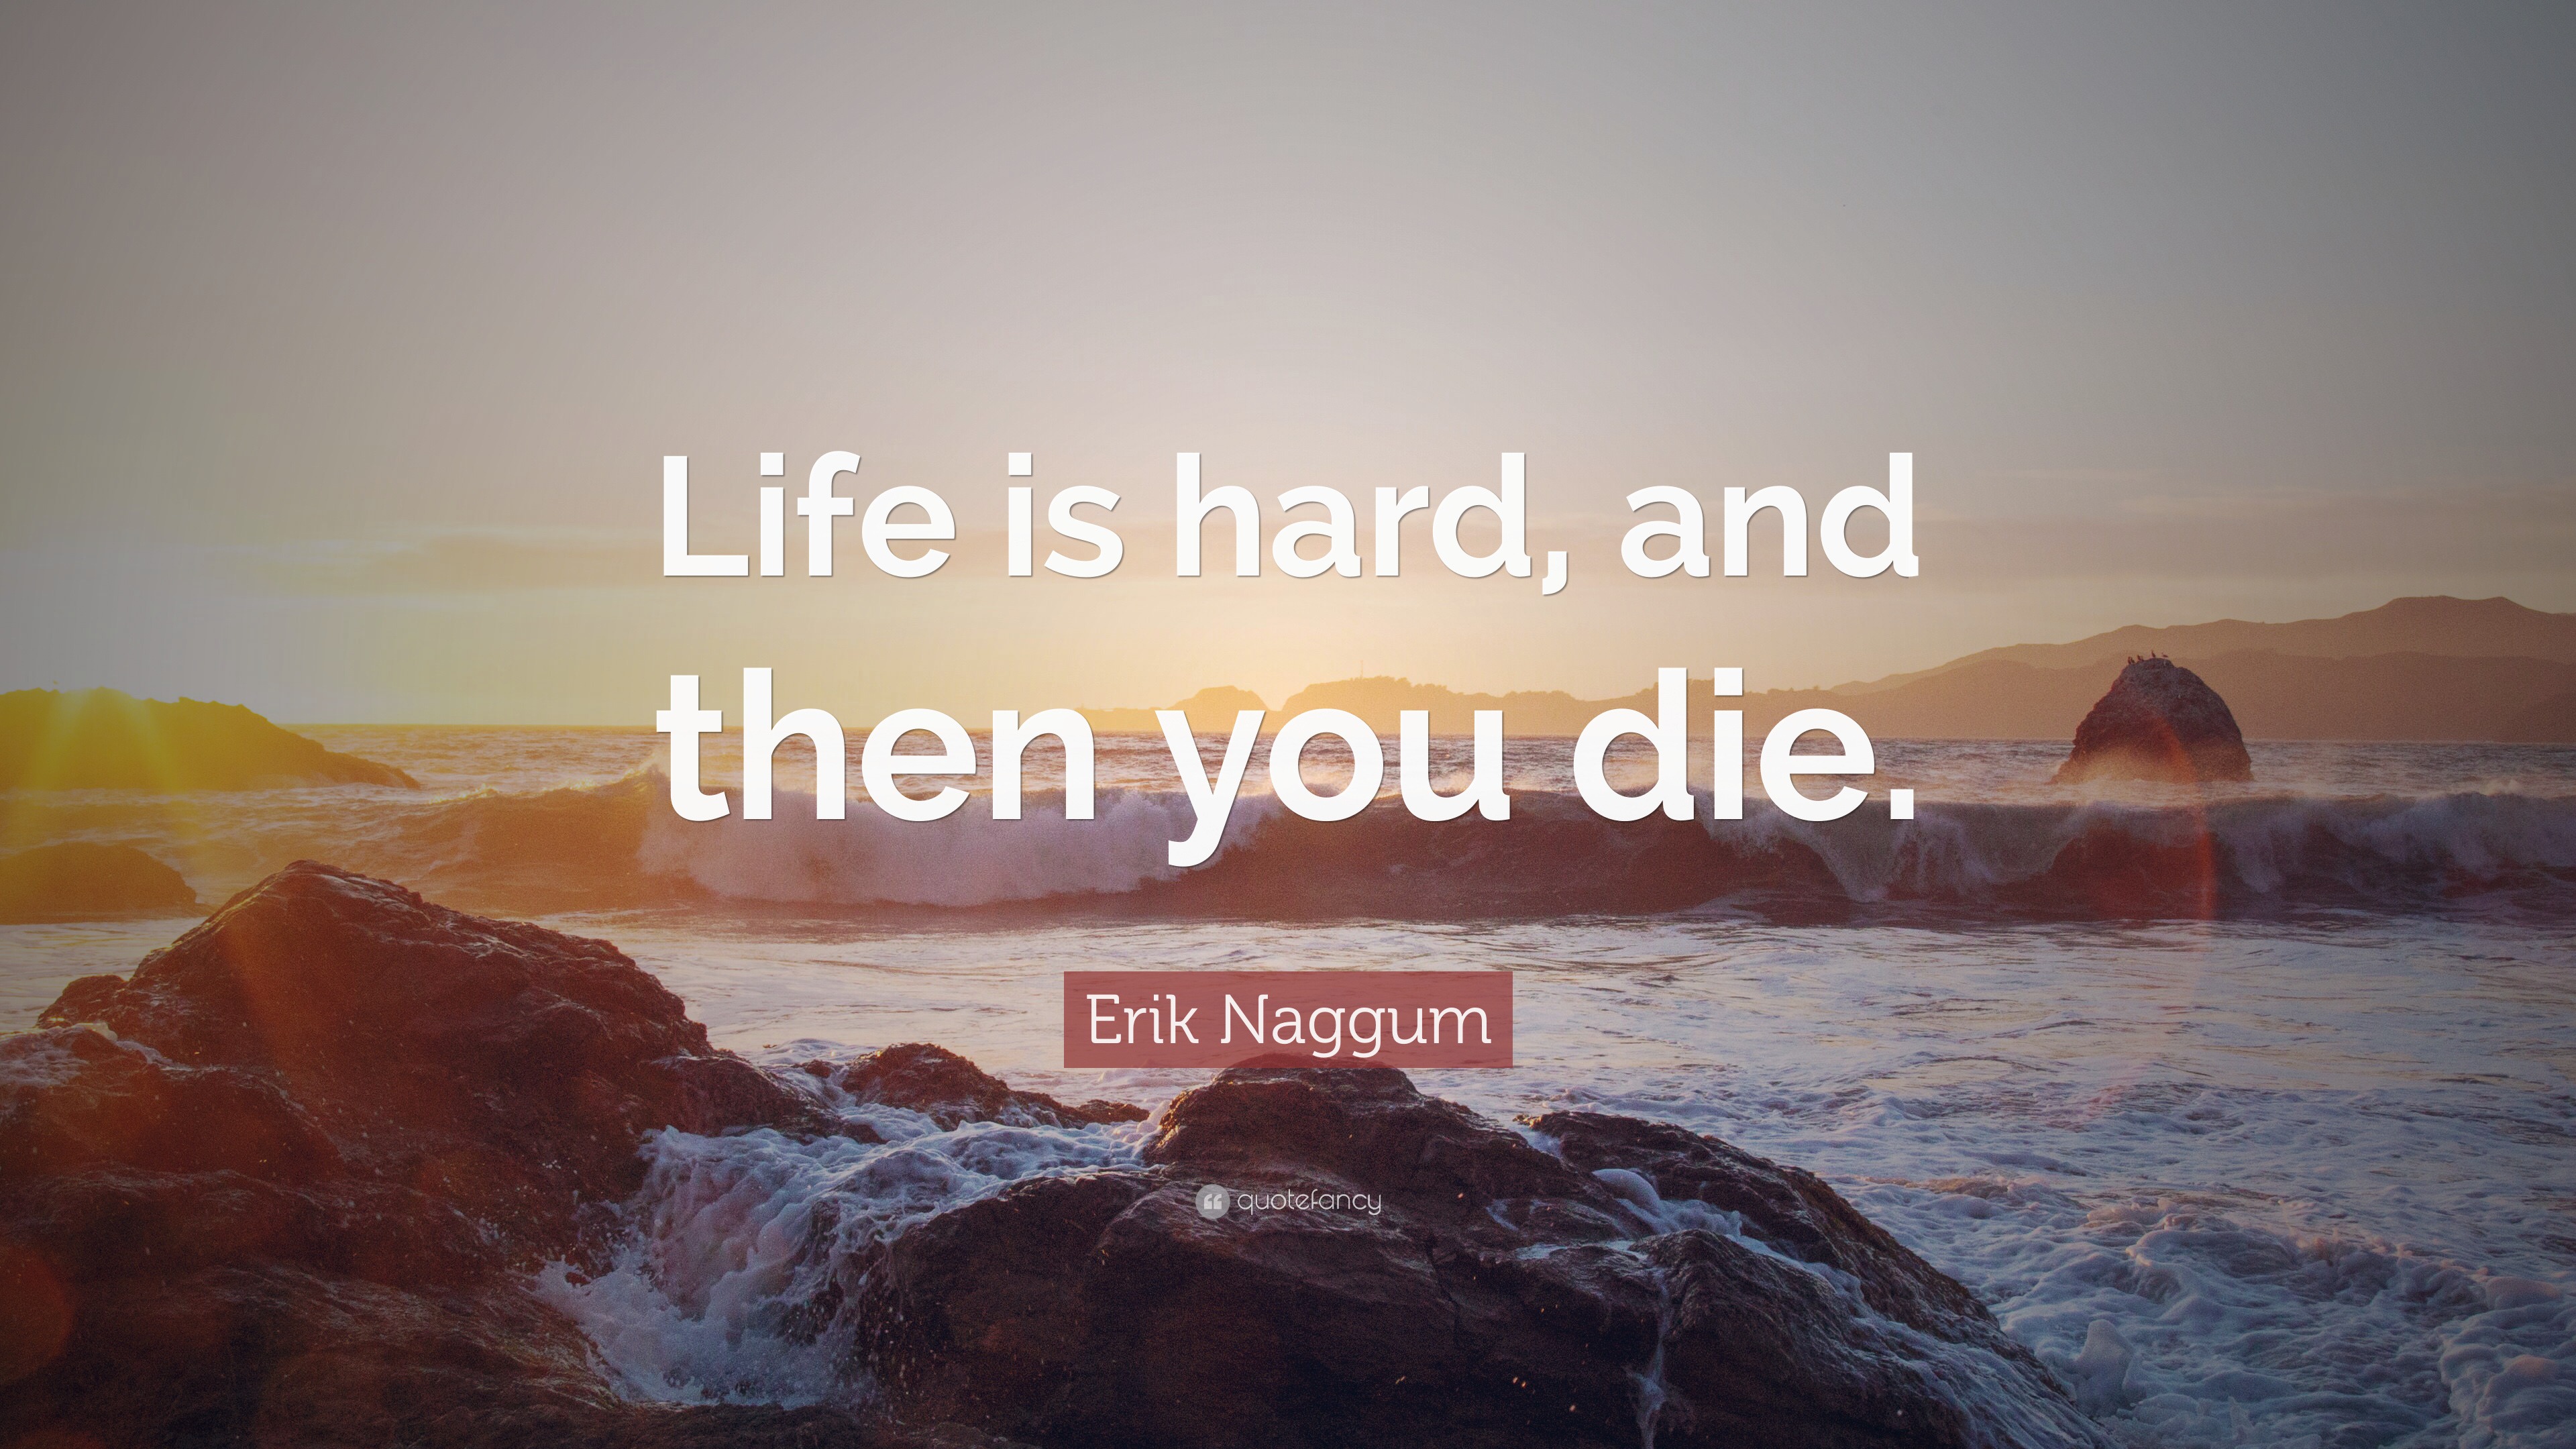 Erik Naggum Quote “Life is hard and then you ”